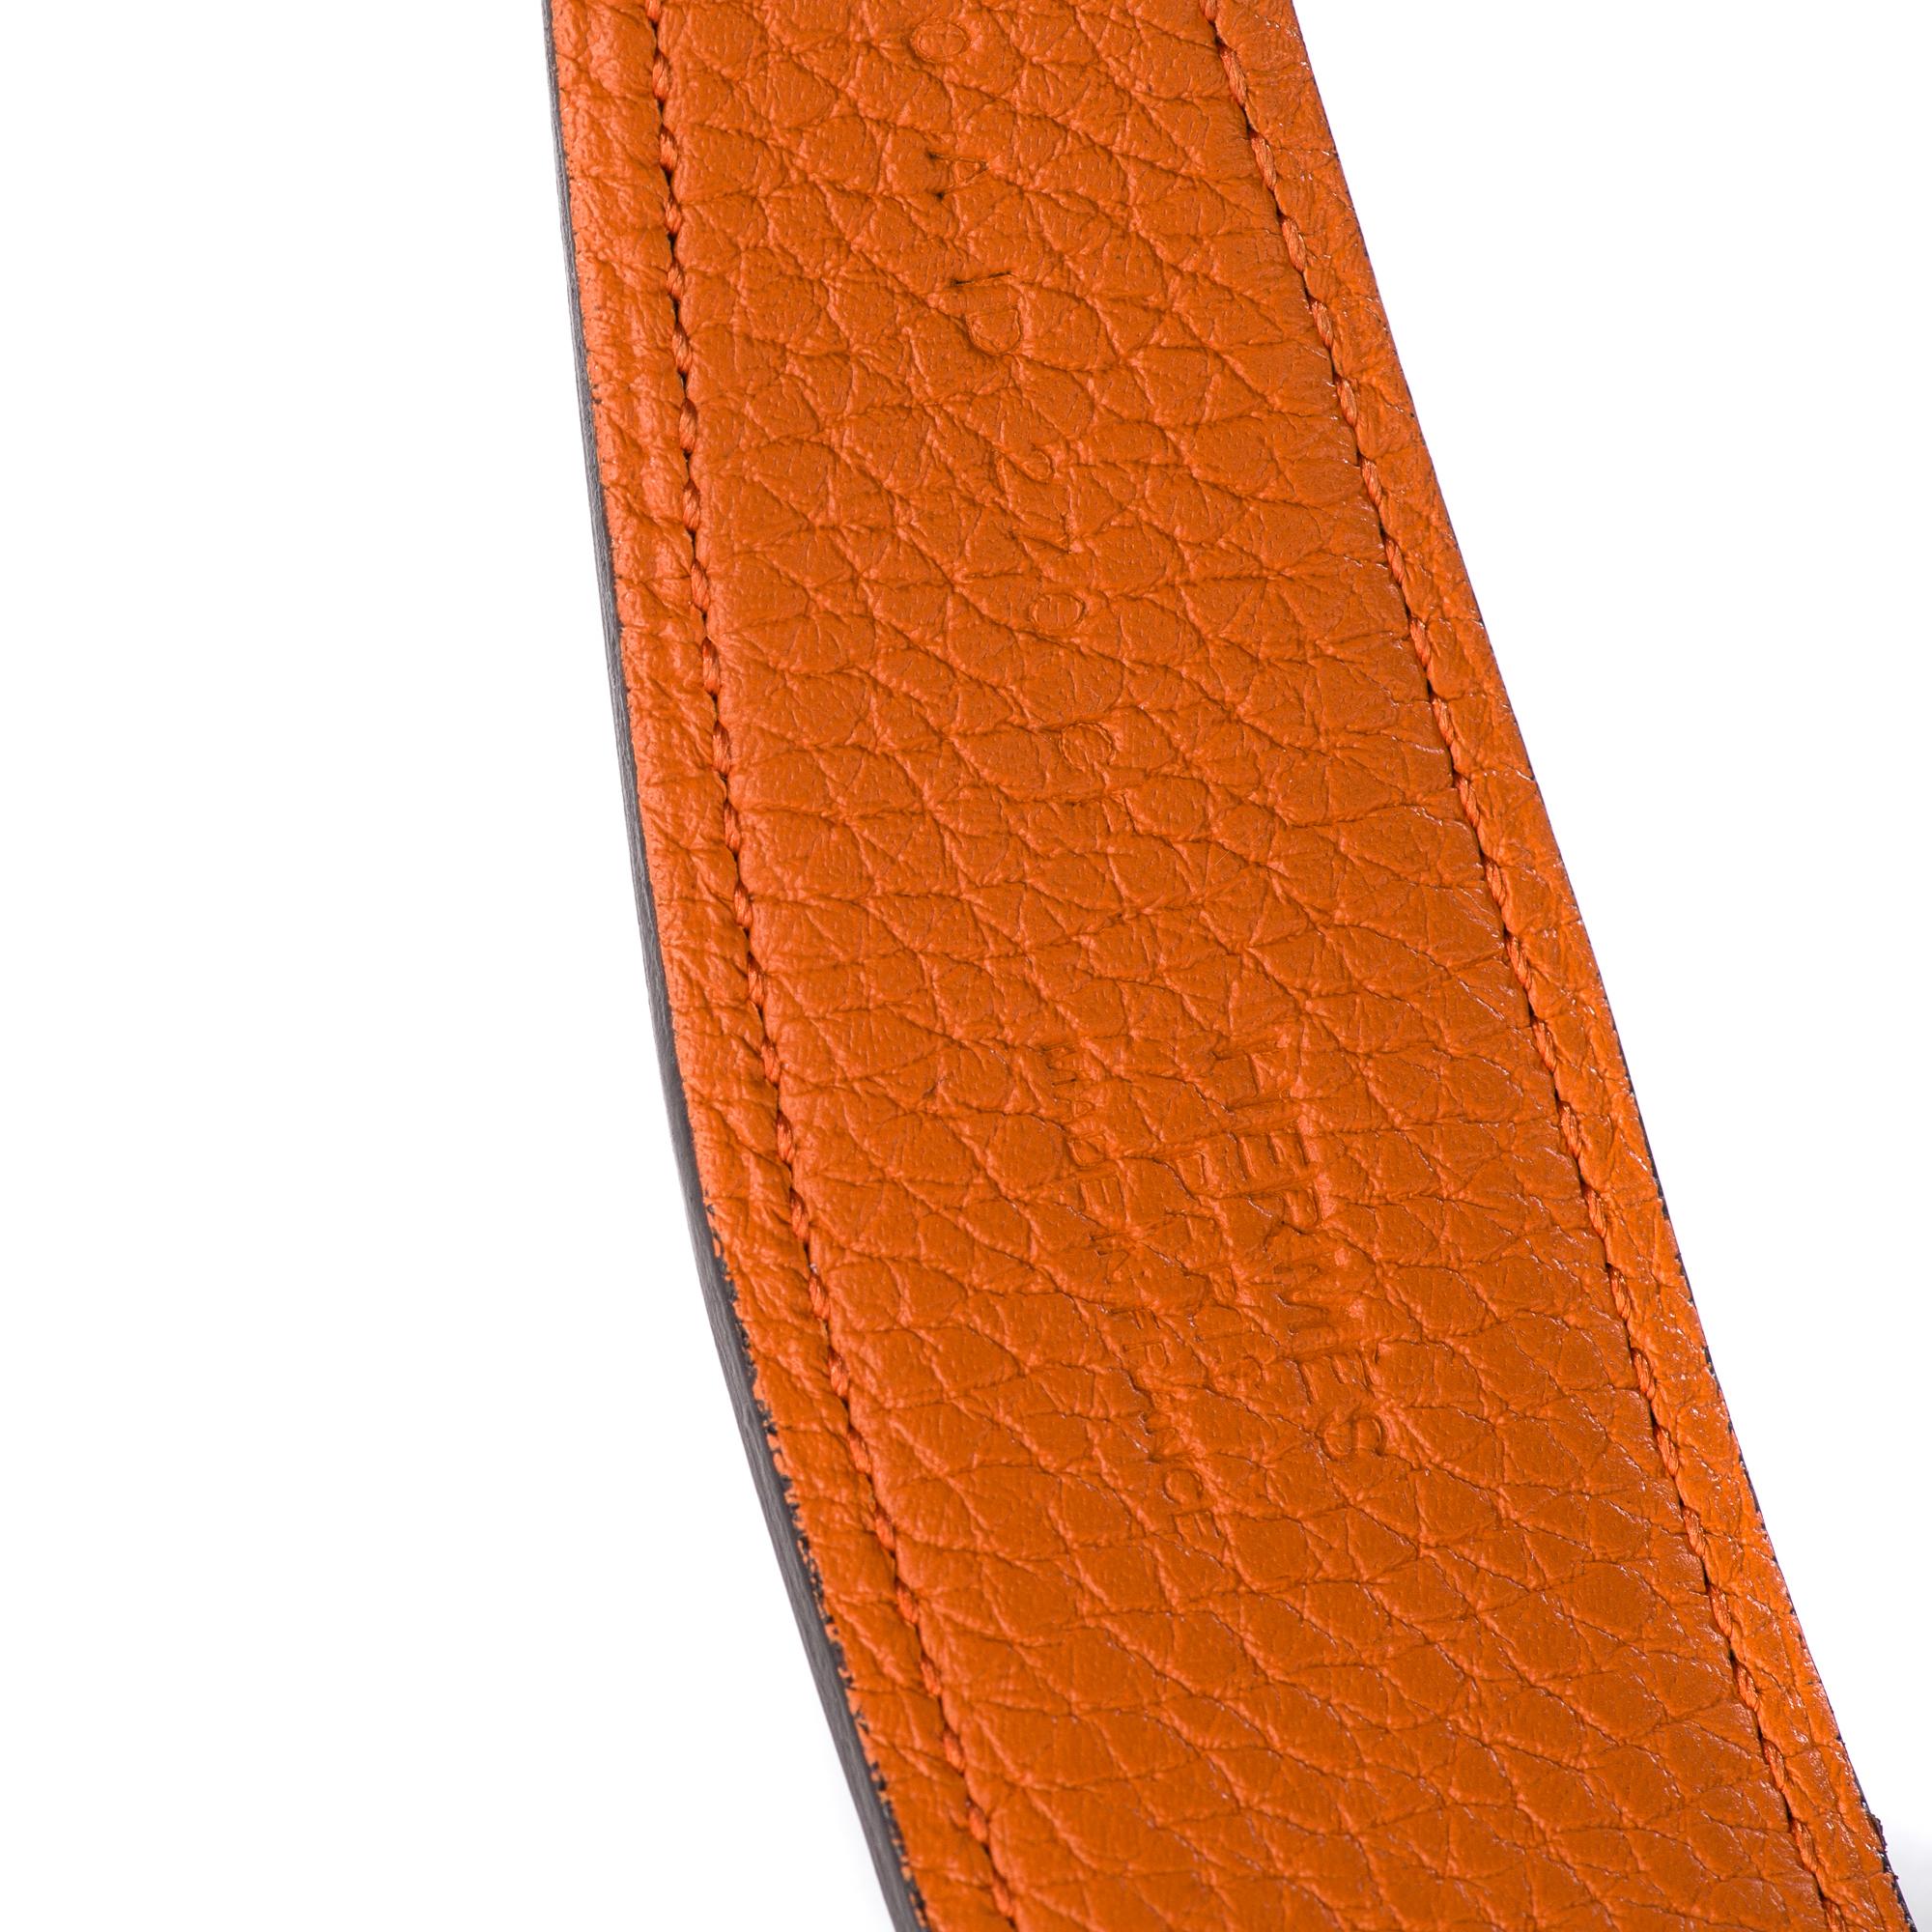 Amazing Hermès belt Reverso for men with Togo orange leather and black bow leather on the other side.
Size: 90
